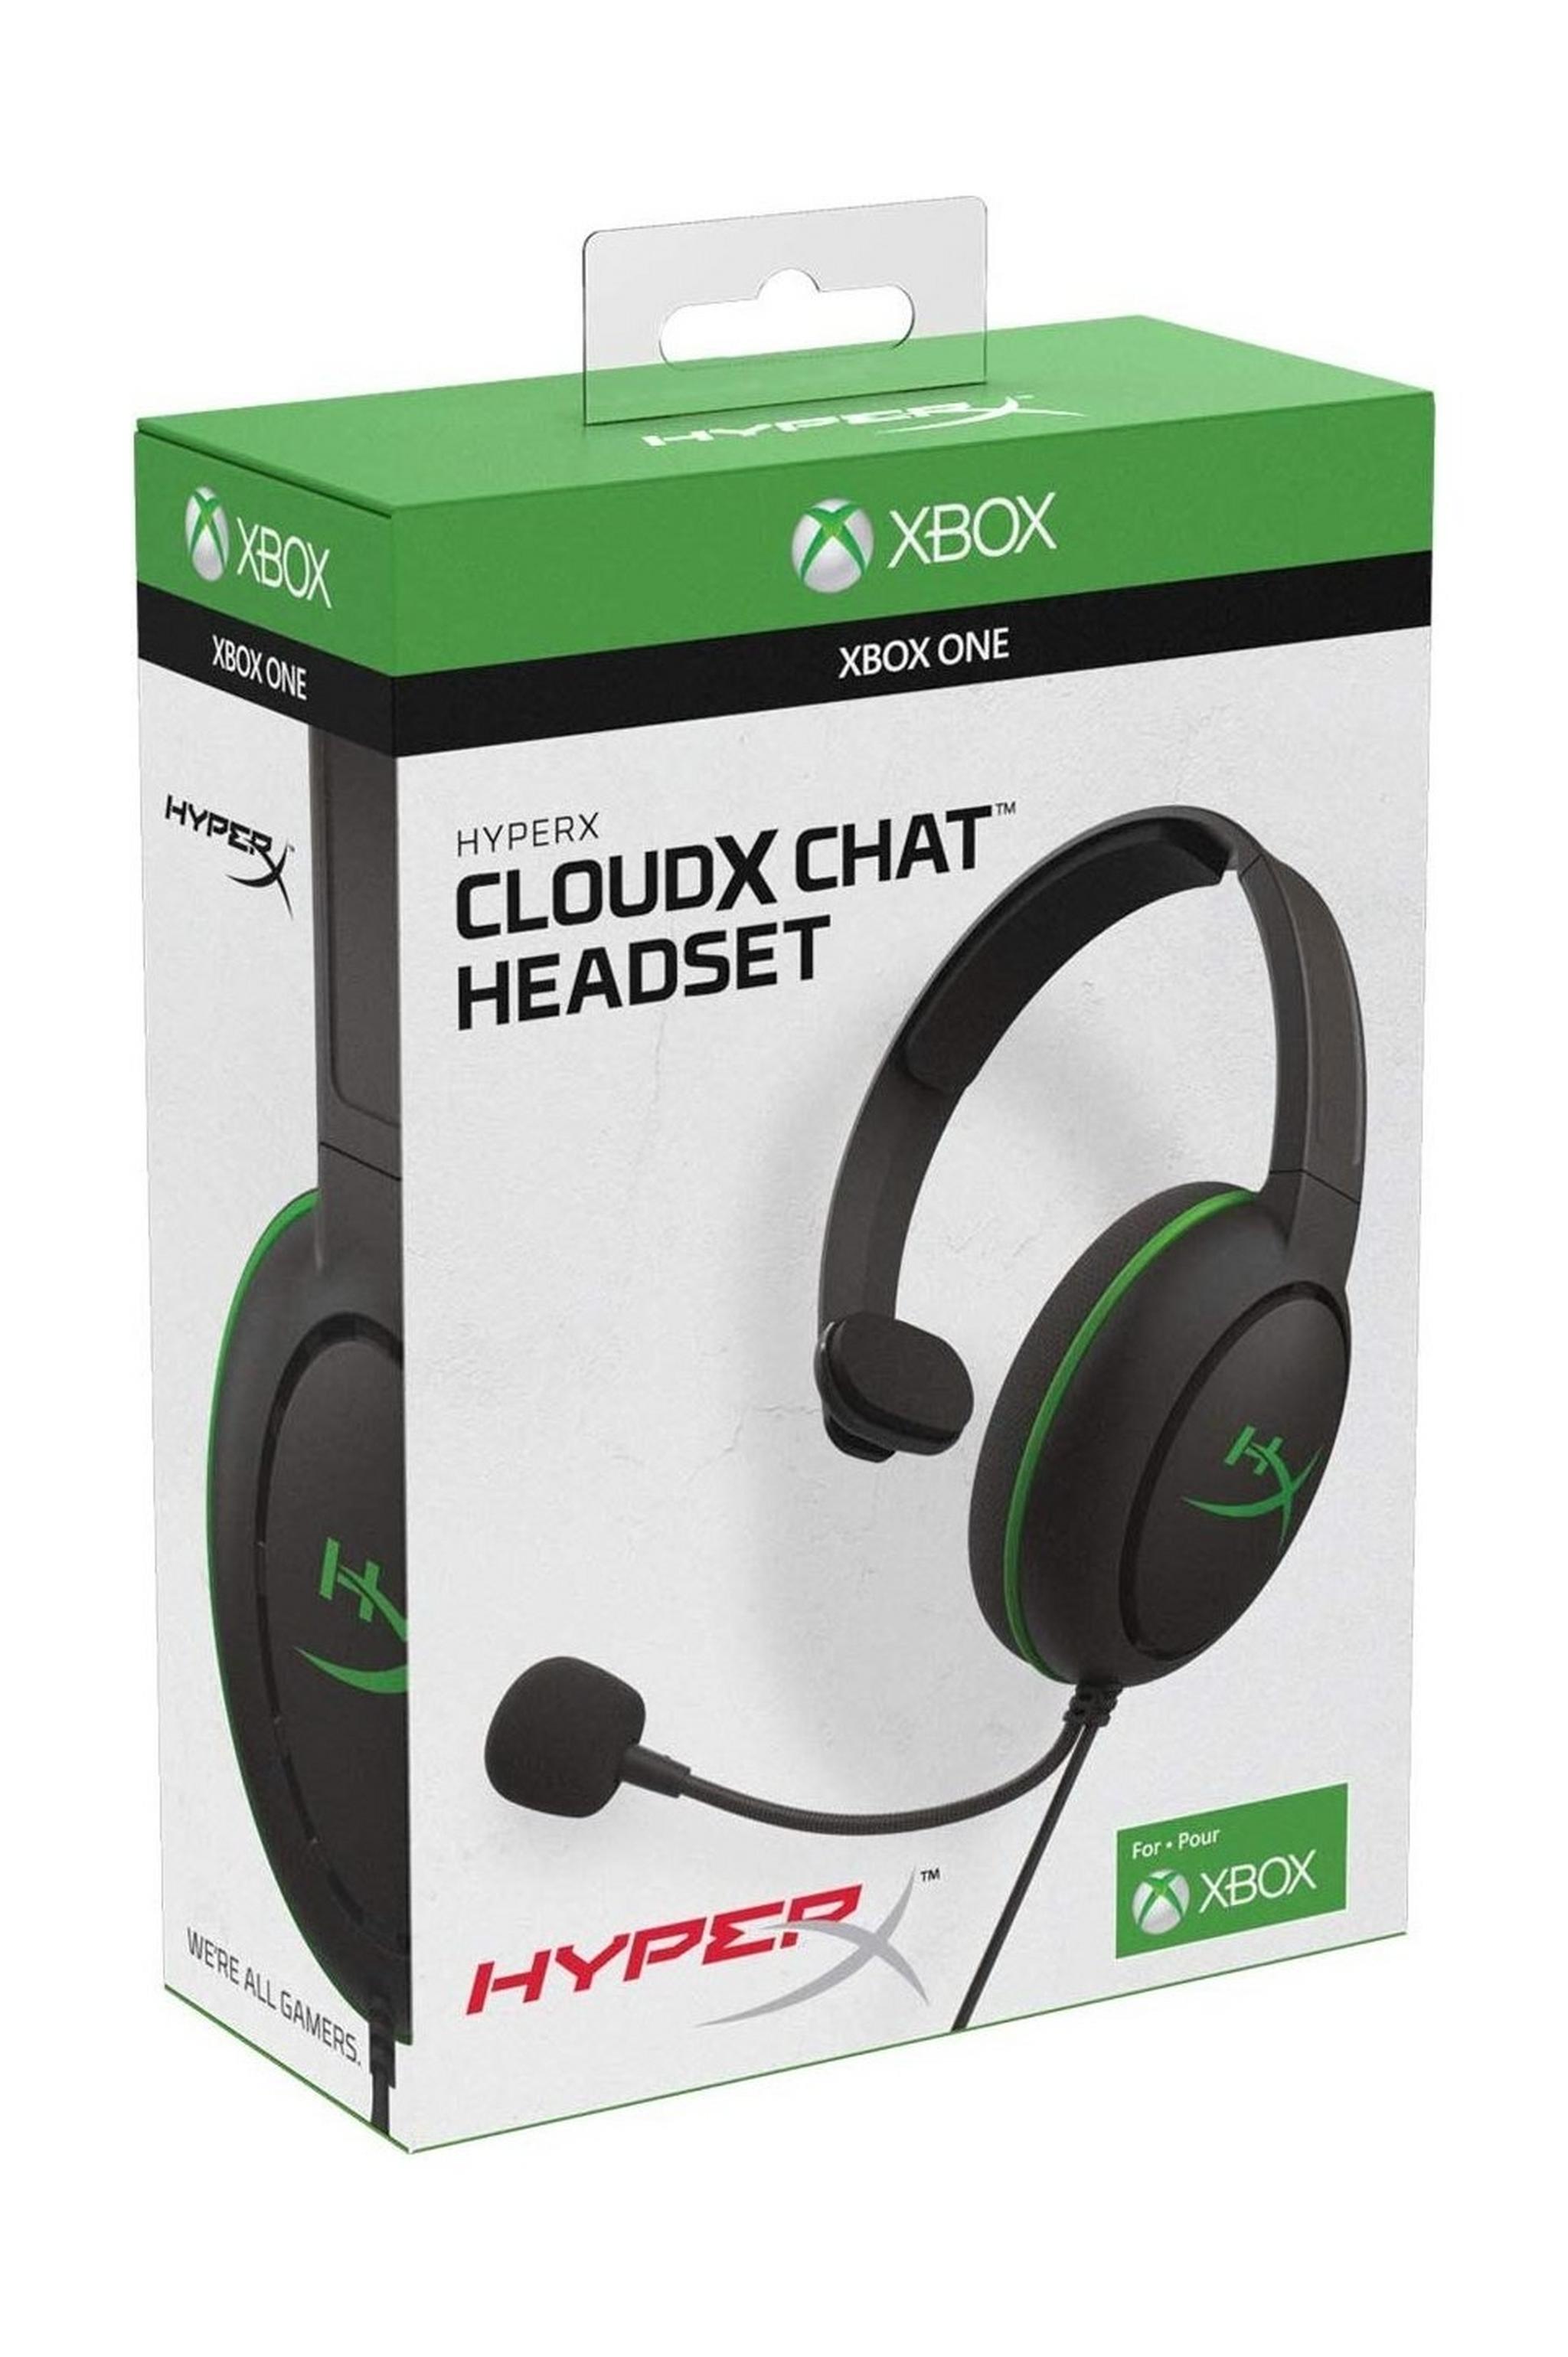 HyperX CloudX Chat Xbox One Wired Headset - Black